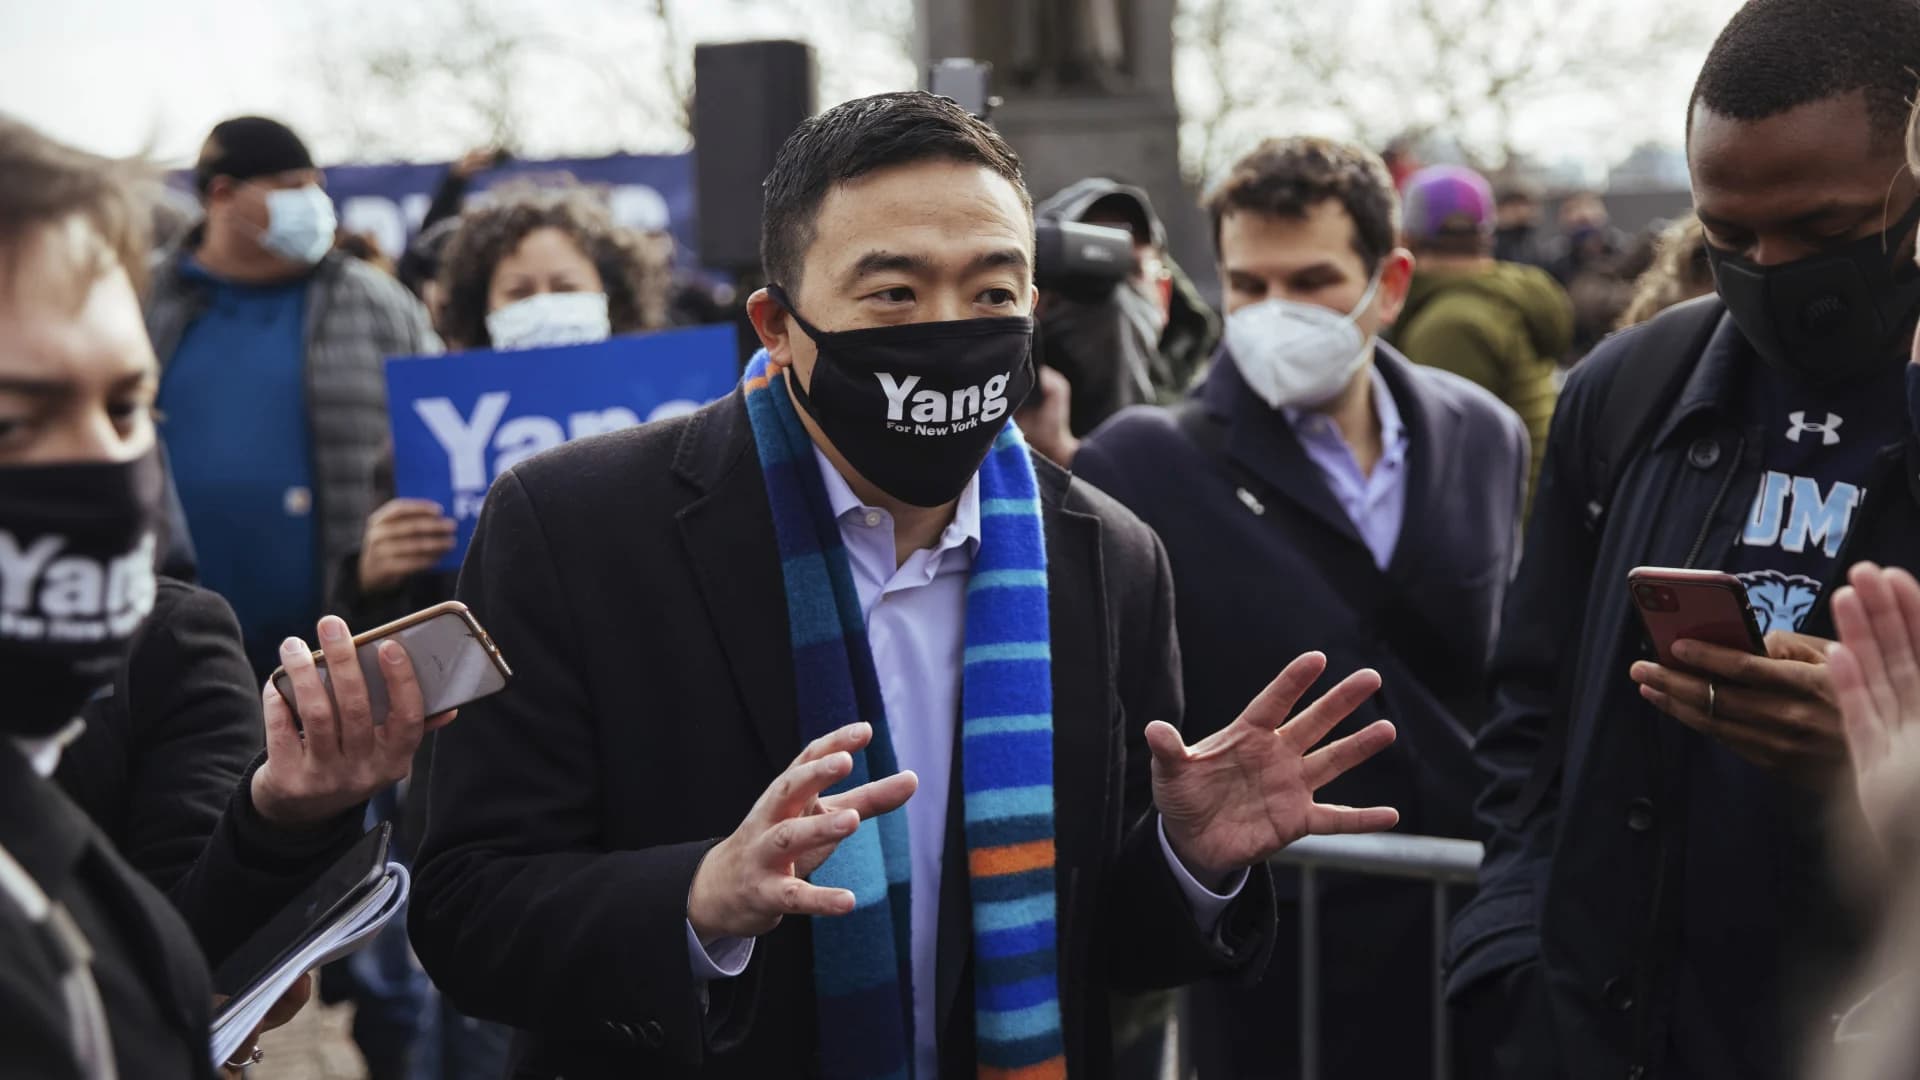 NYC mayoral candidate Andrew Yang tests positive for coronavirus